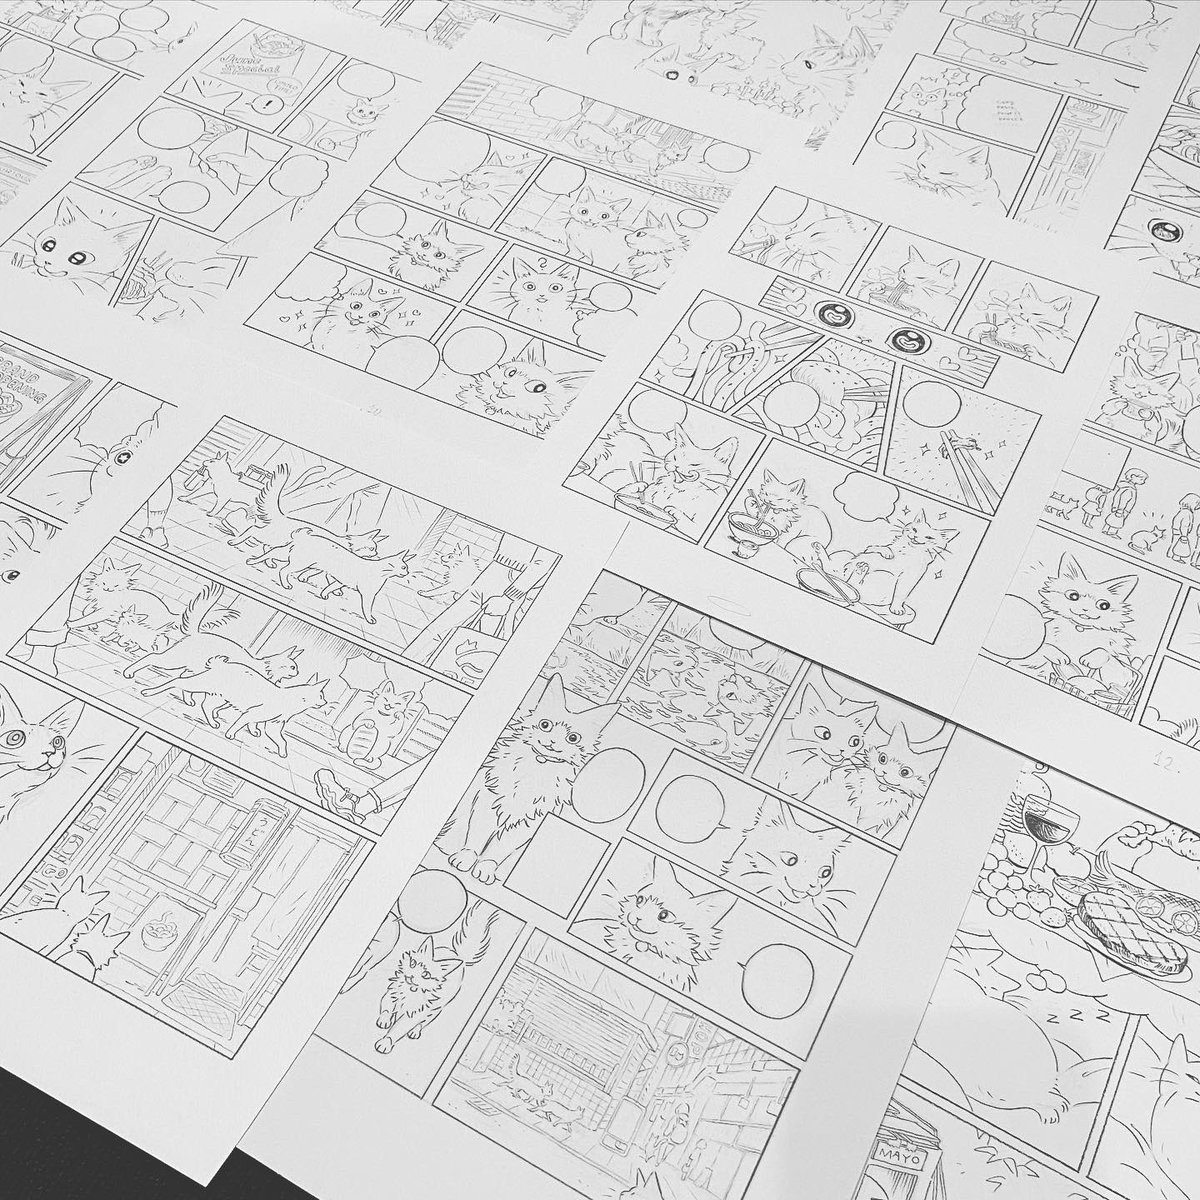 A comic project about cats and food in the making, just finished the lineart for the final page at last😩💦💕 